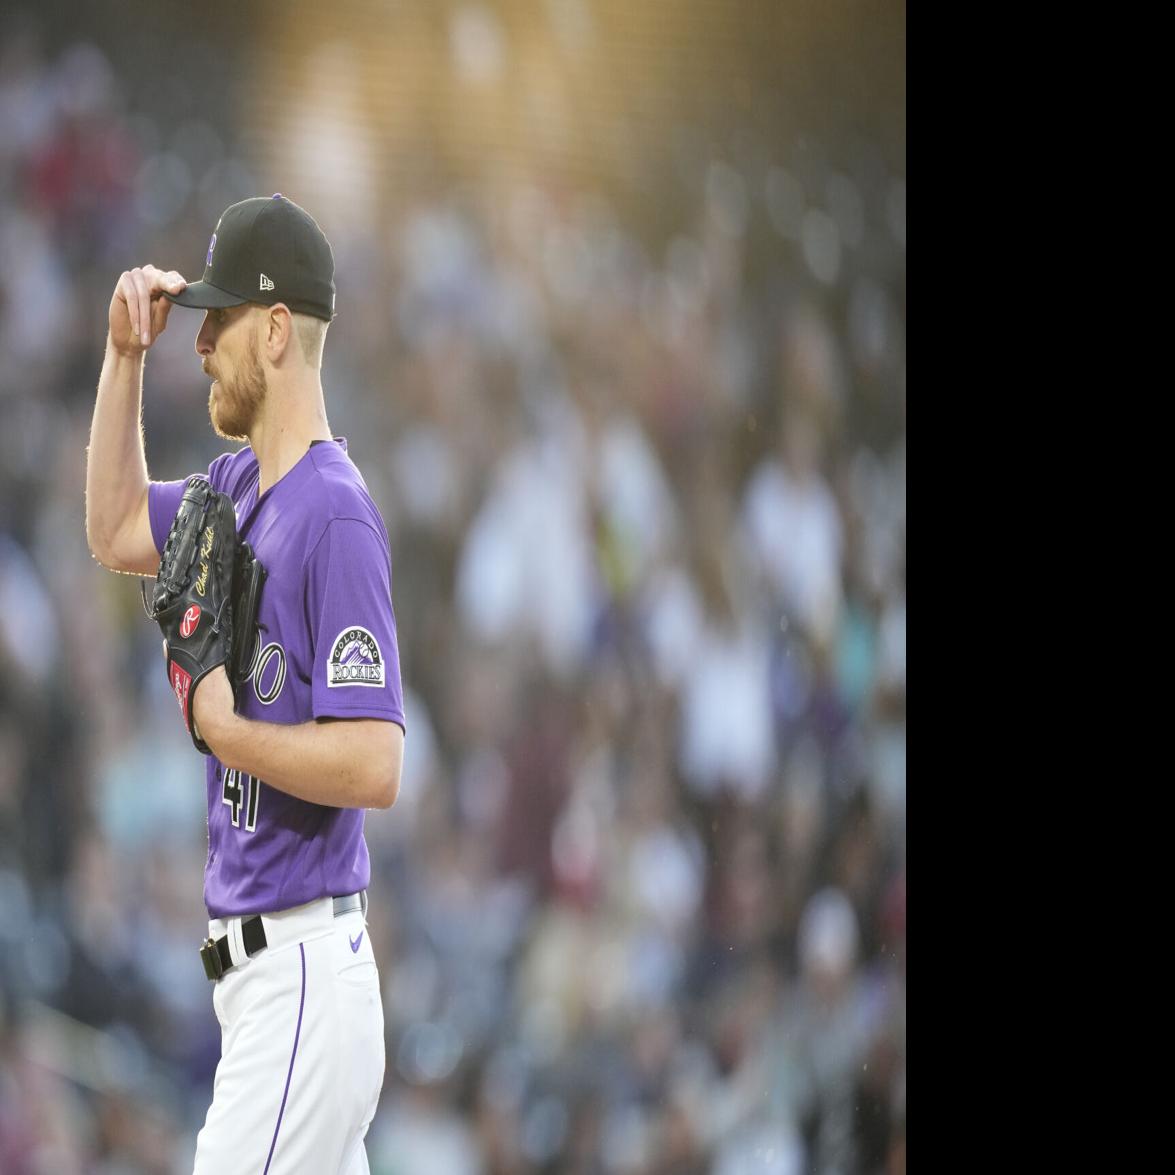 Chad Kuhl, Rockies' fifth starter, ripped by Giants – The Denver Post